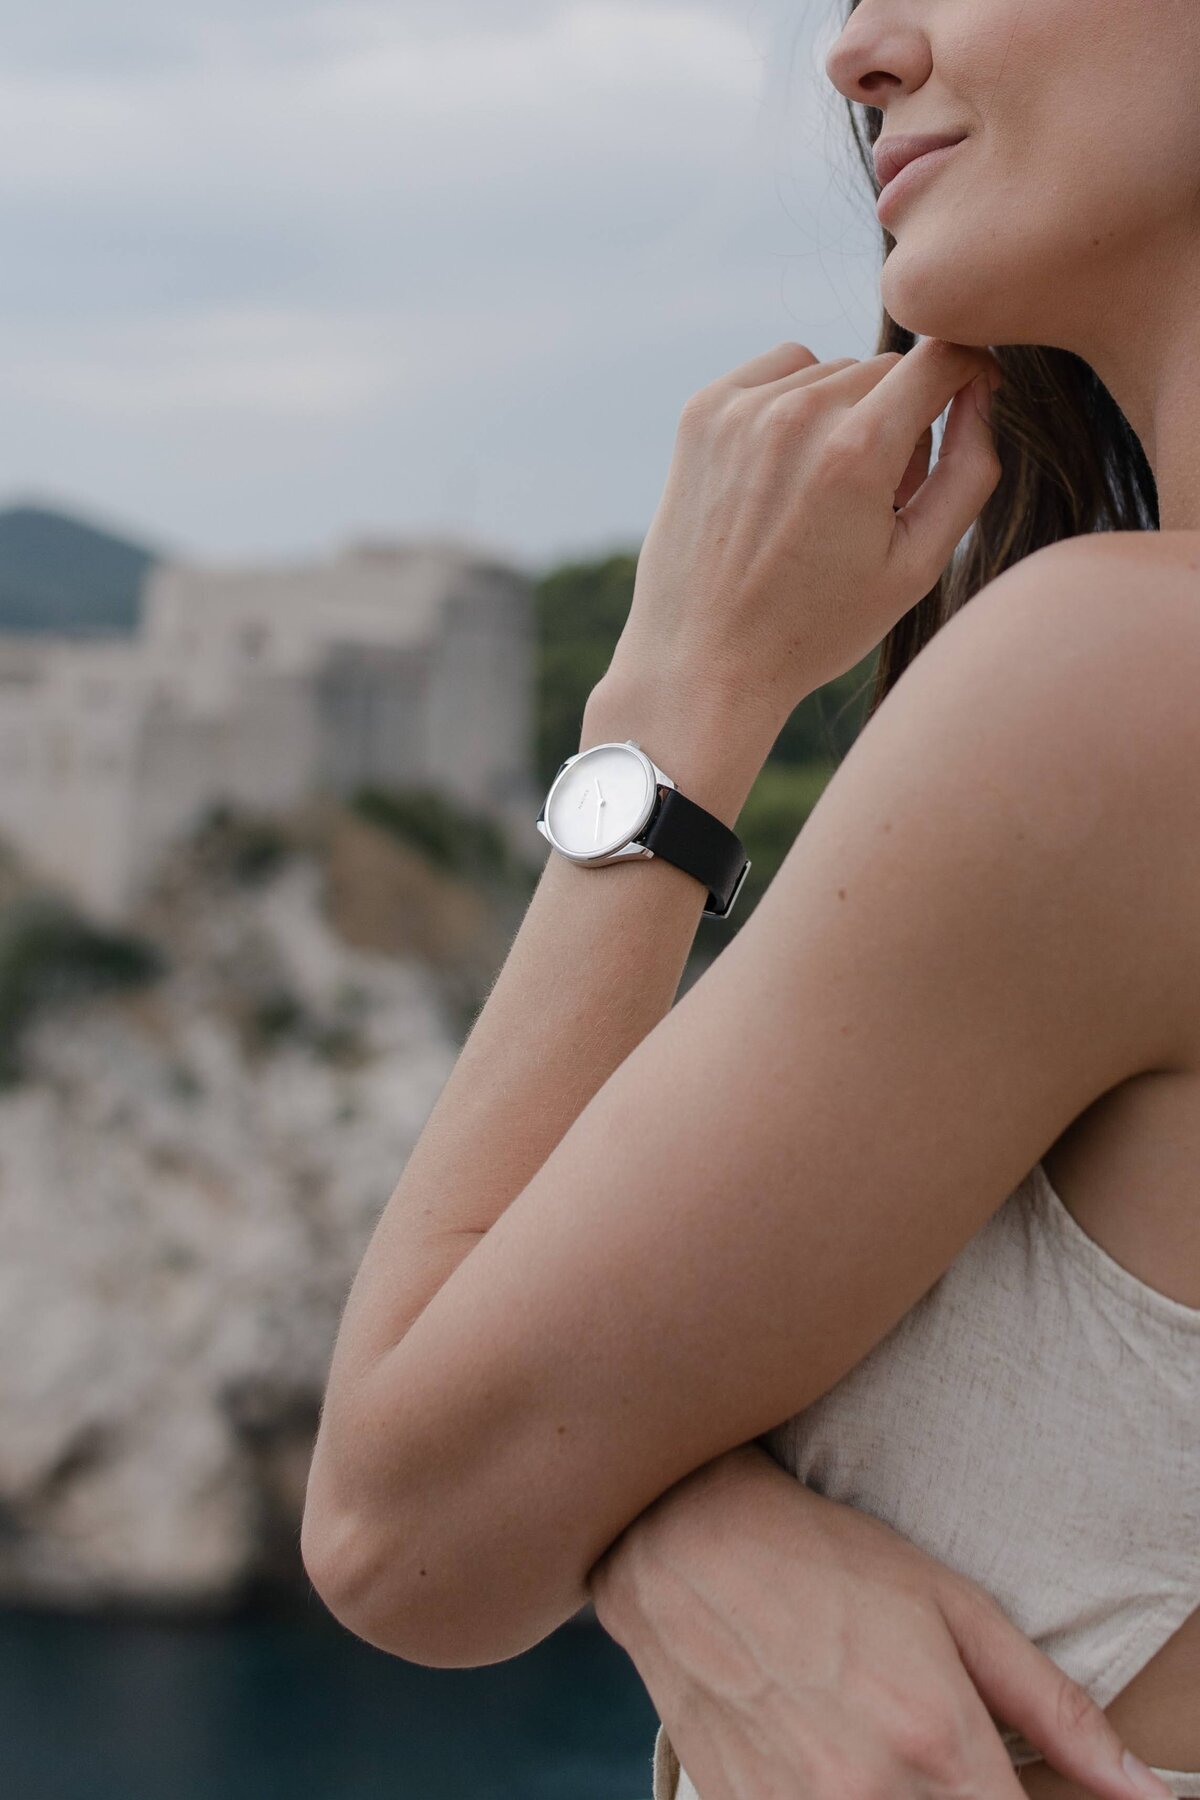 Brand photography and videography for Nacre Watches and Jewelry filmed in Croatia